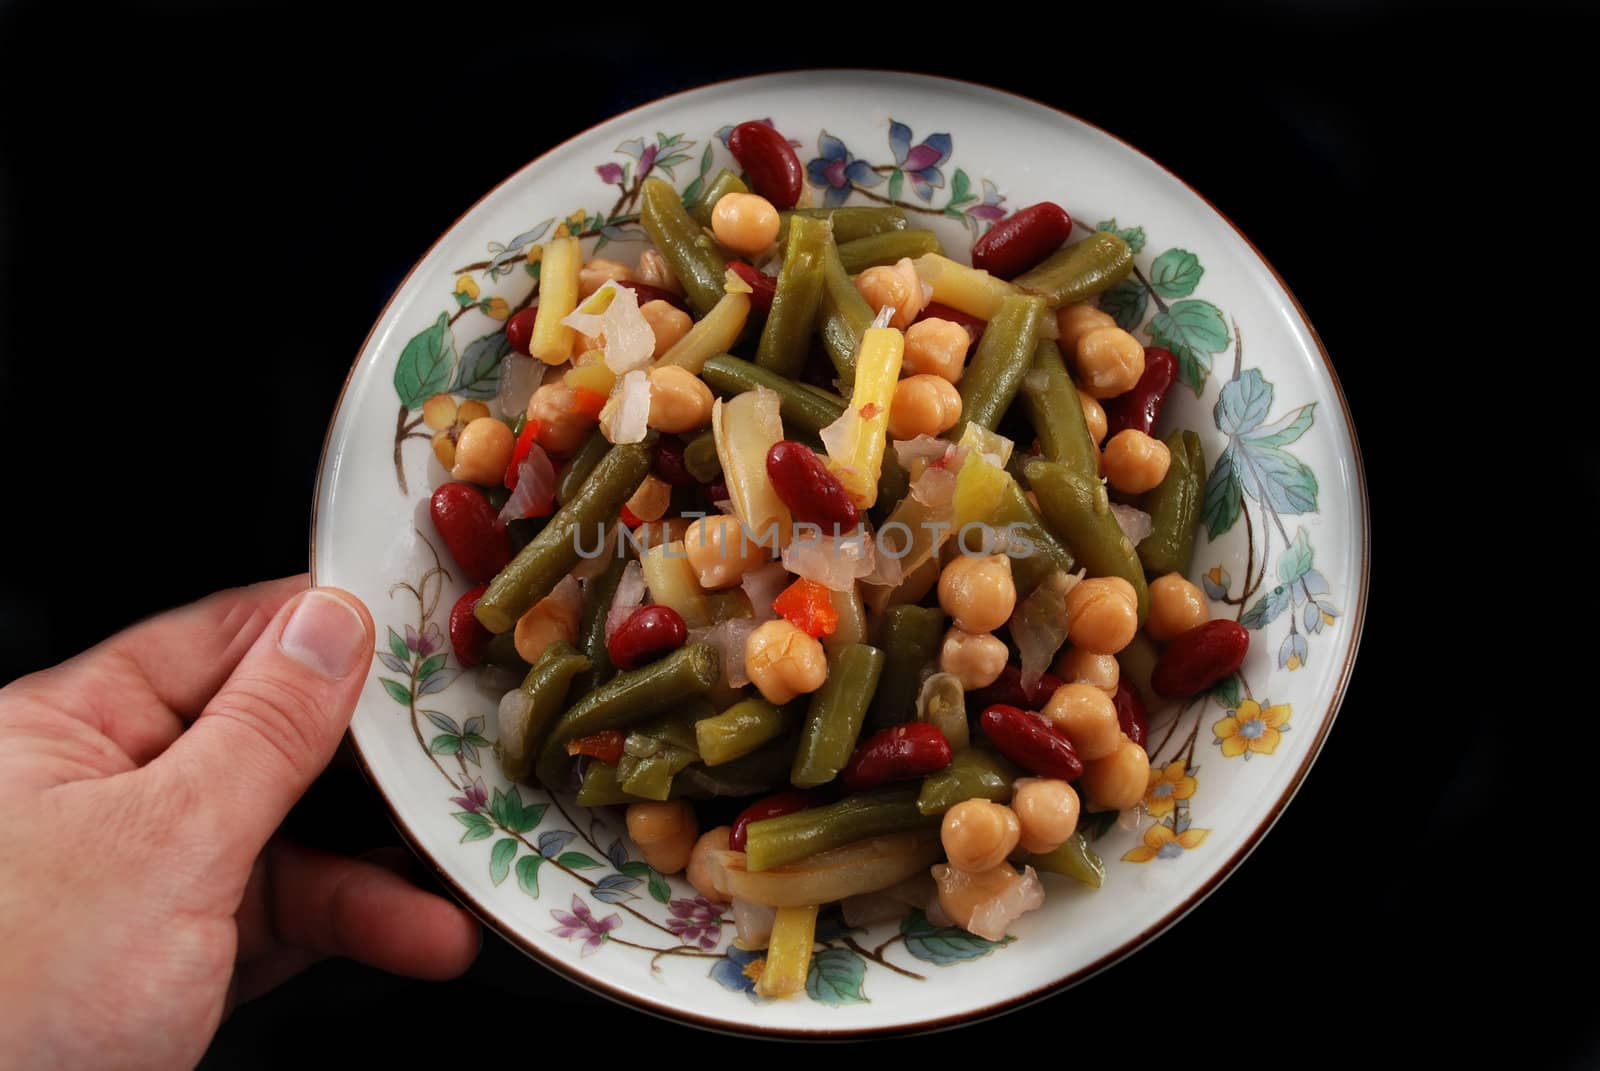 stock picture of a bean and vegetable salad